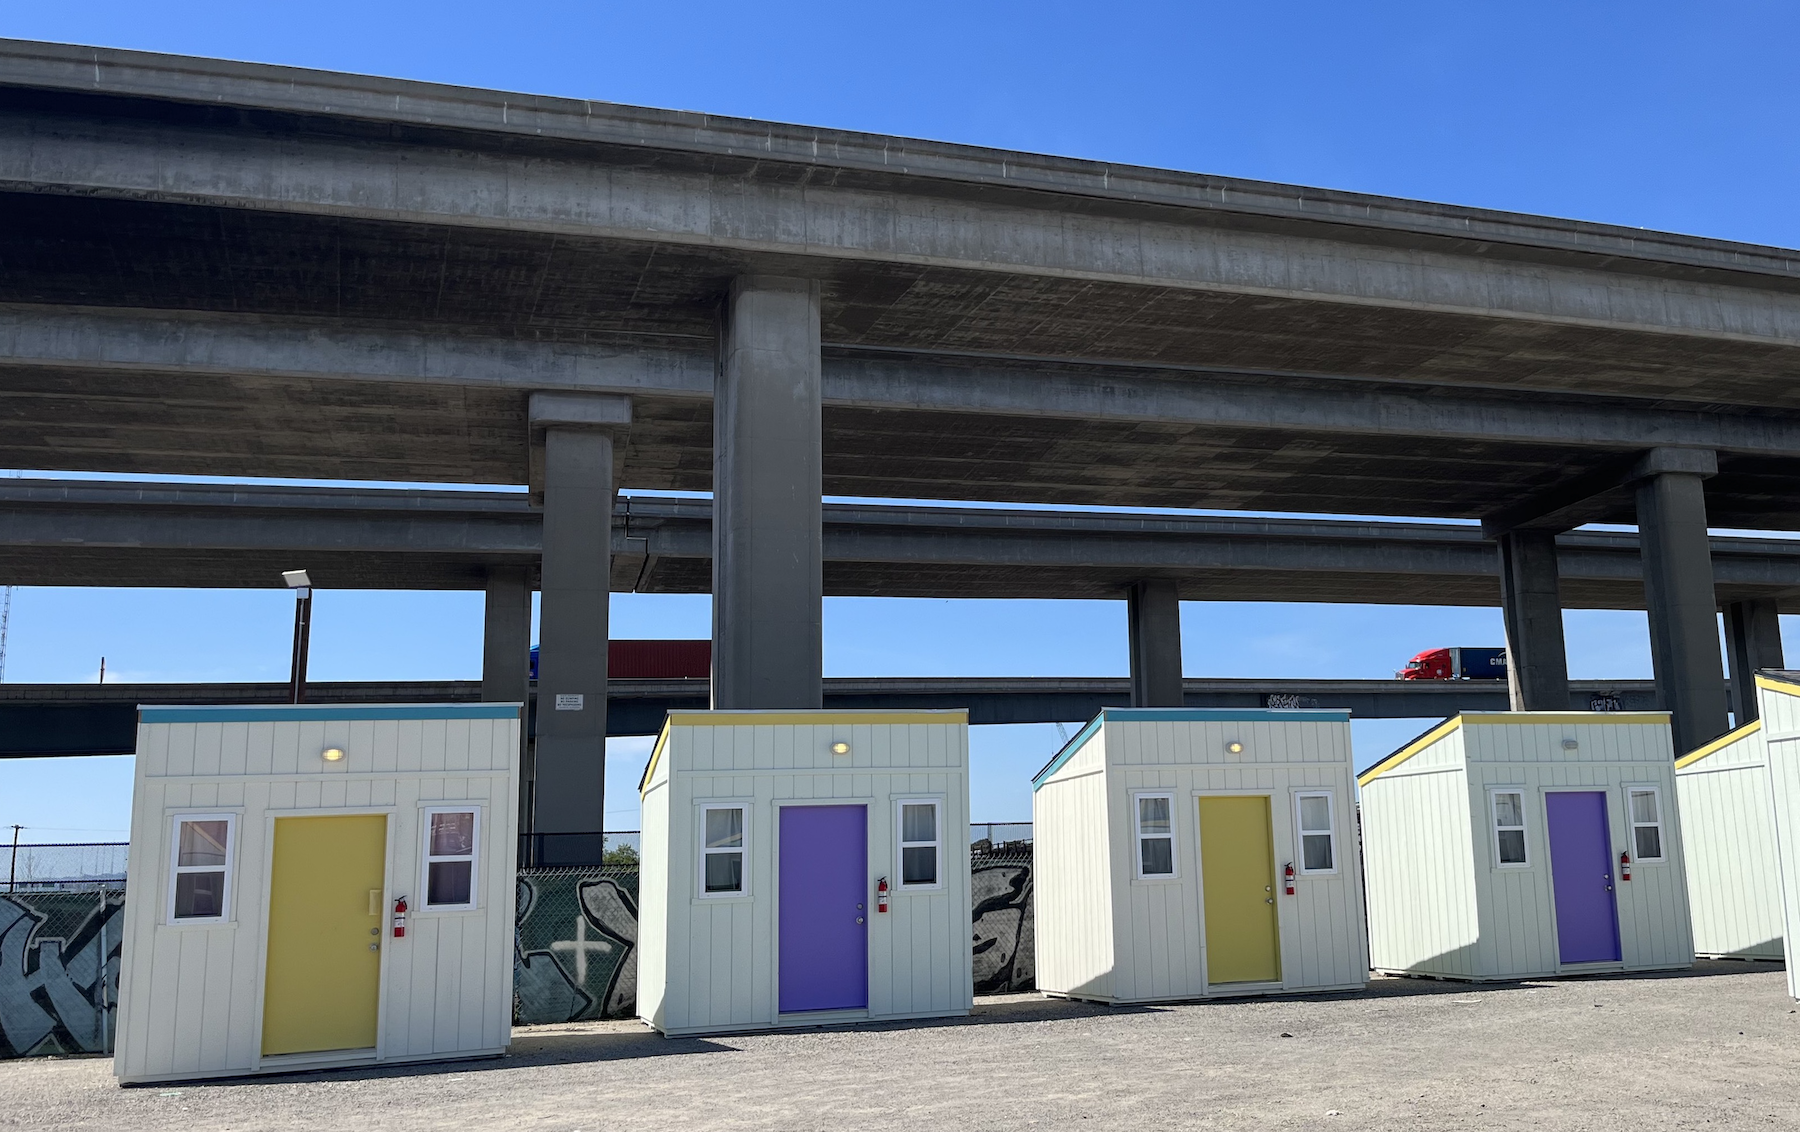 four colorful cabins in front of elevated highway with a blue sky